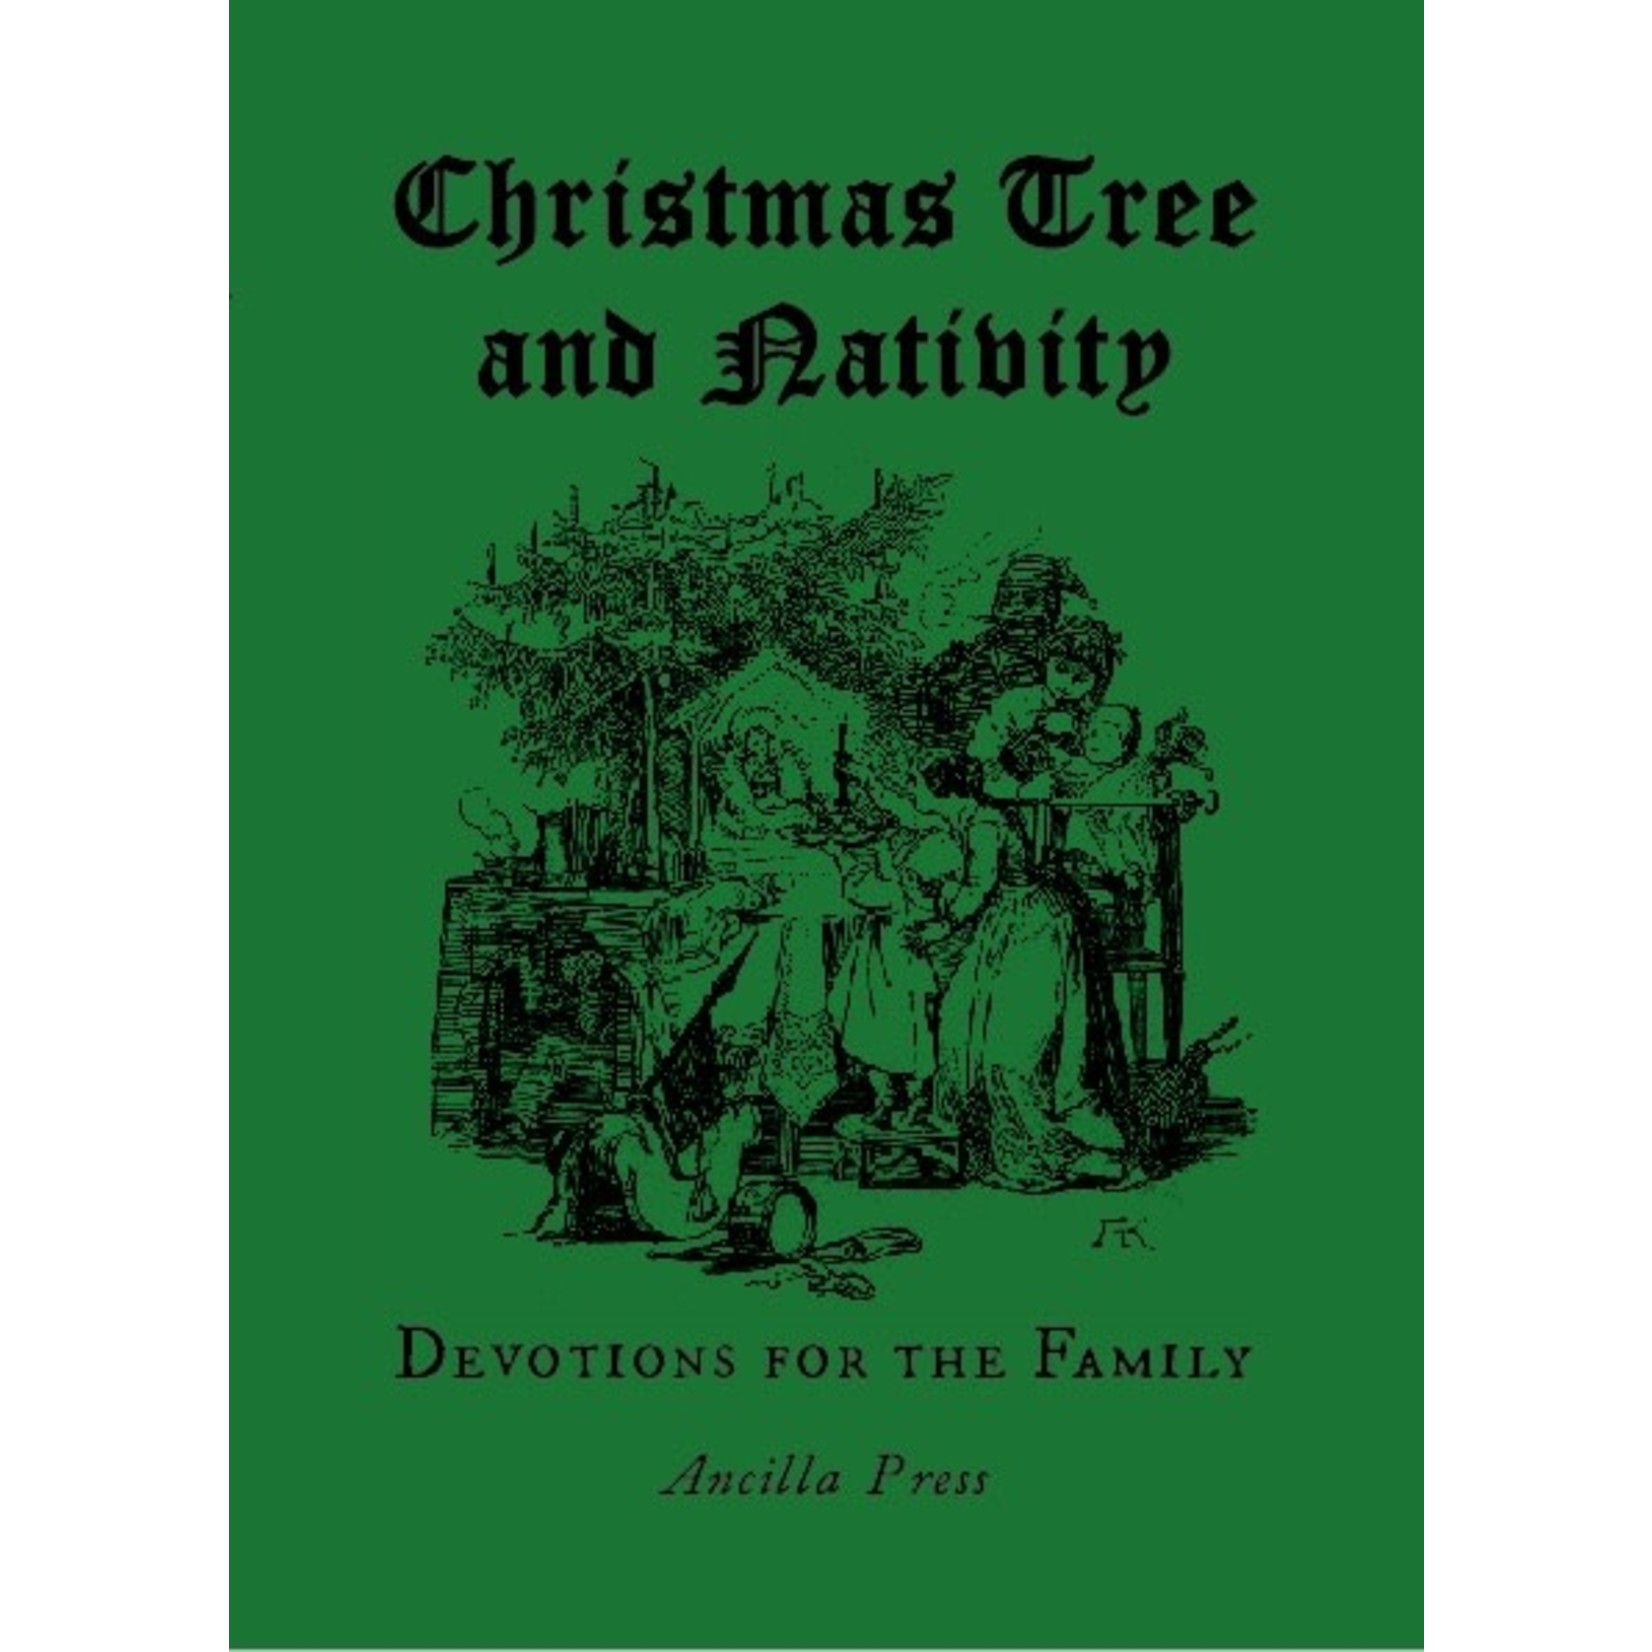 Christmas Tree and Nativity Devotions for the Family